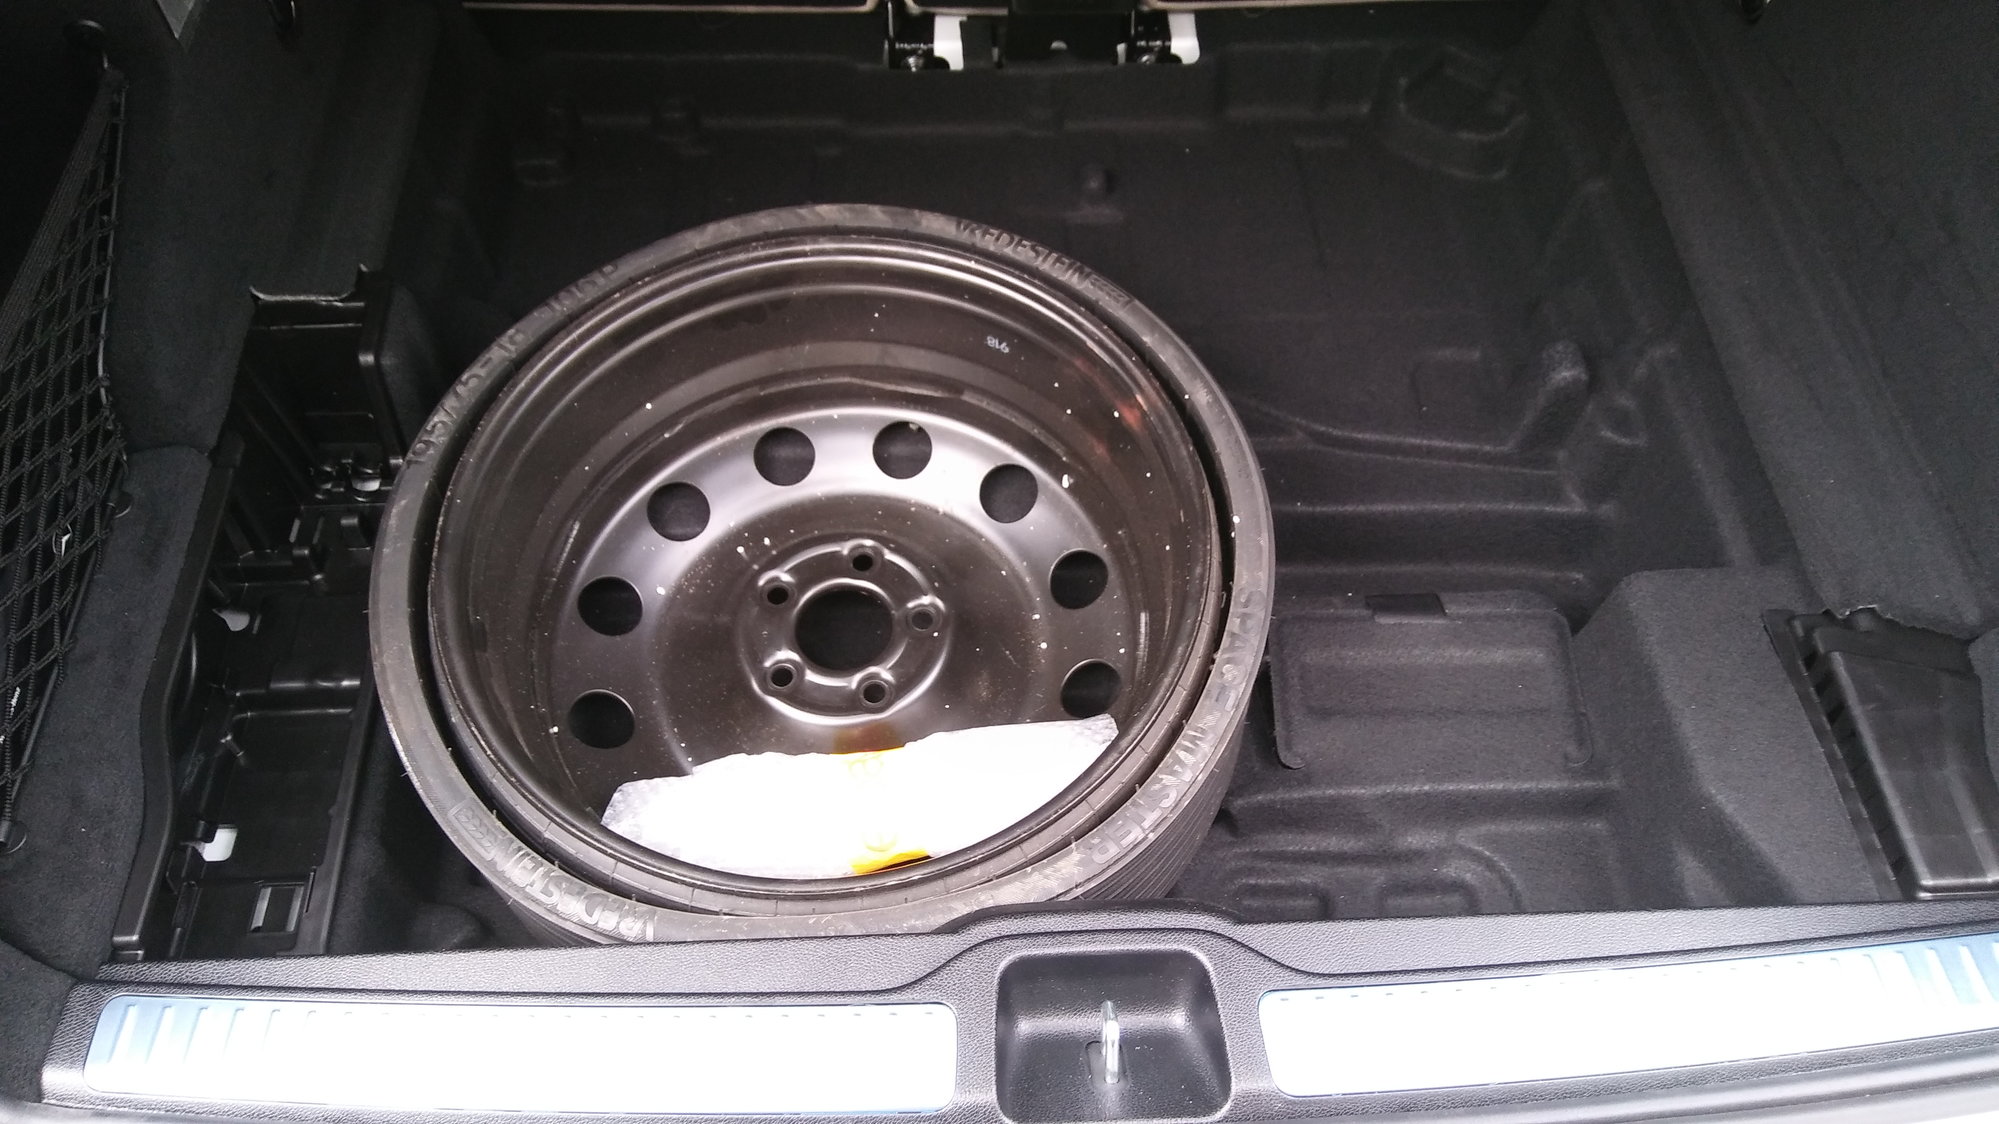 GLC300 Spare Tire Options - MBWorld.org Forums 2019 Mercedes Benz Glc 300 Spare Tire Kit